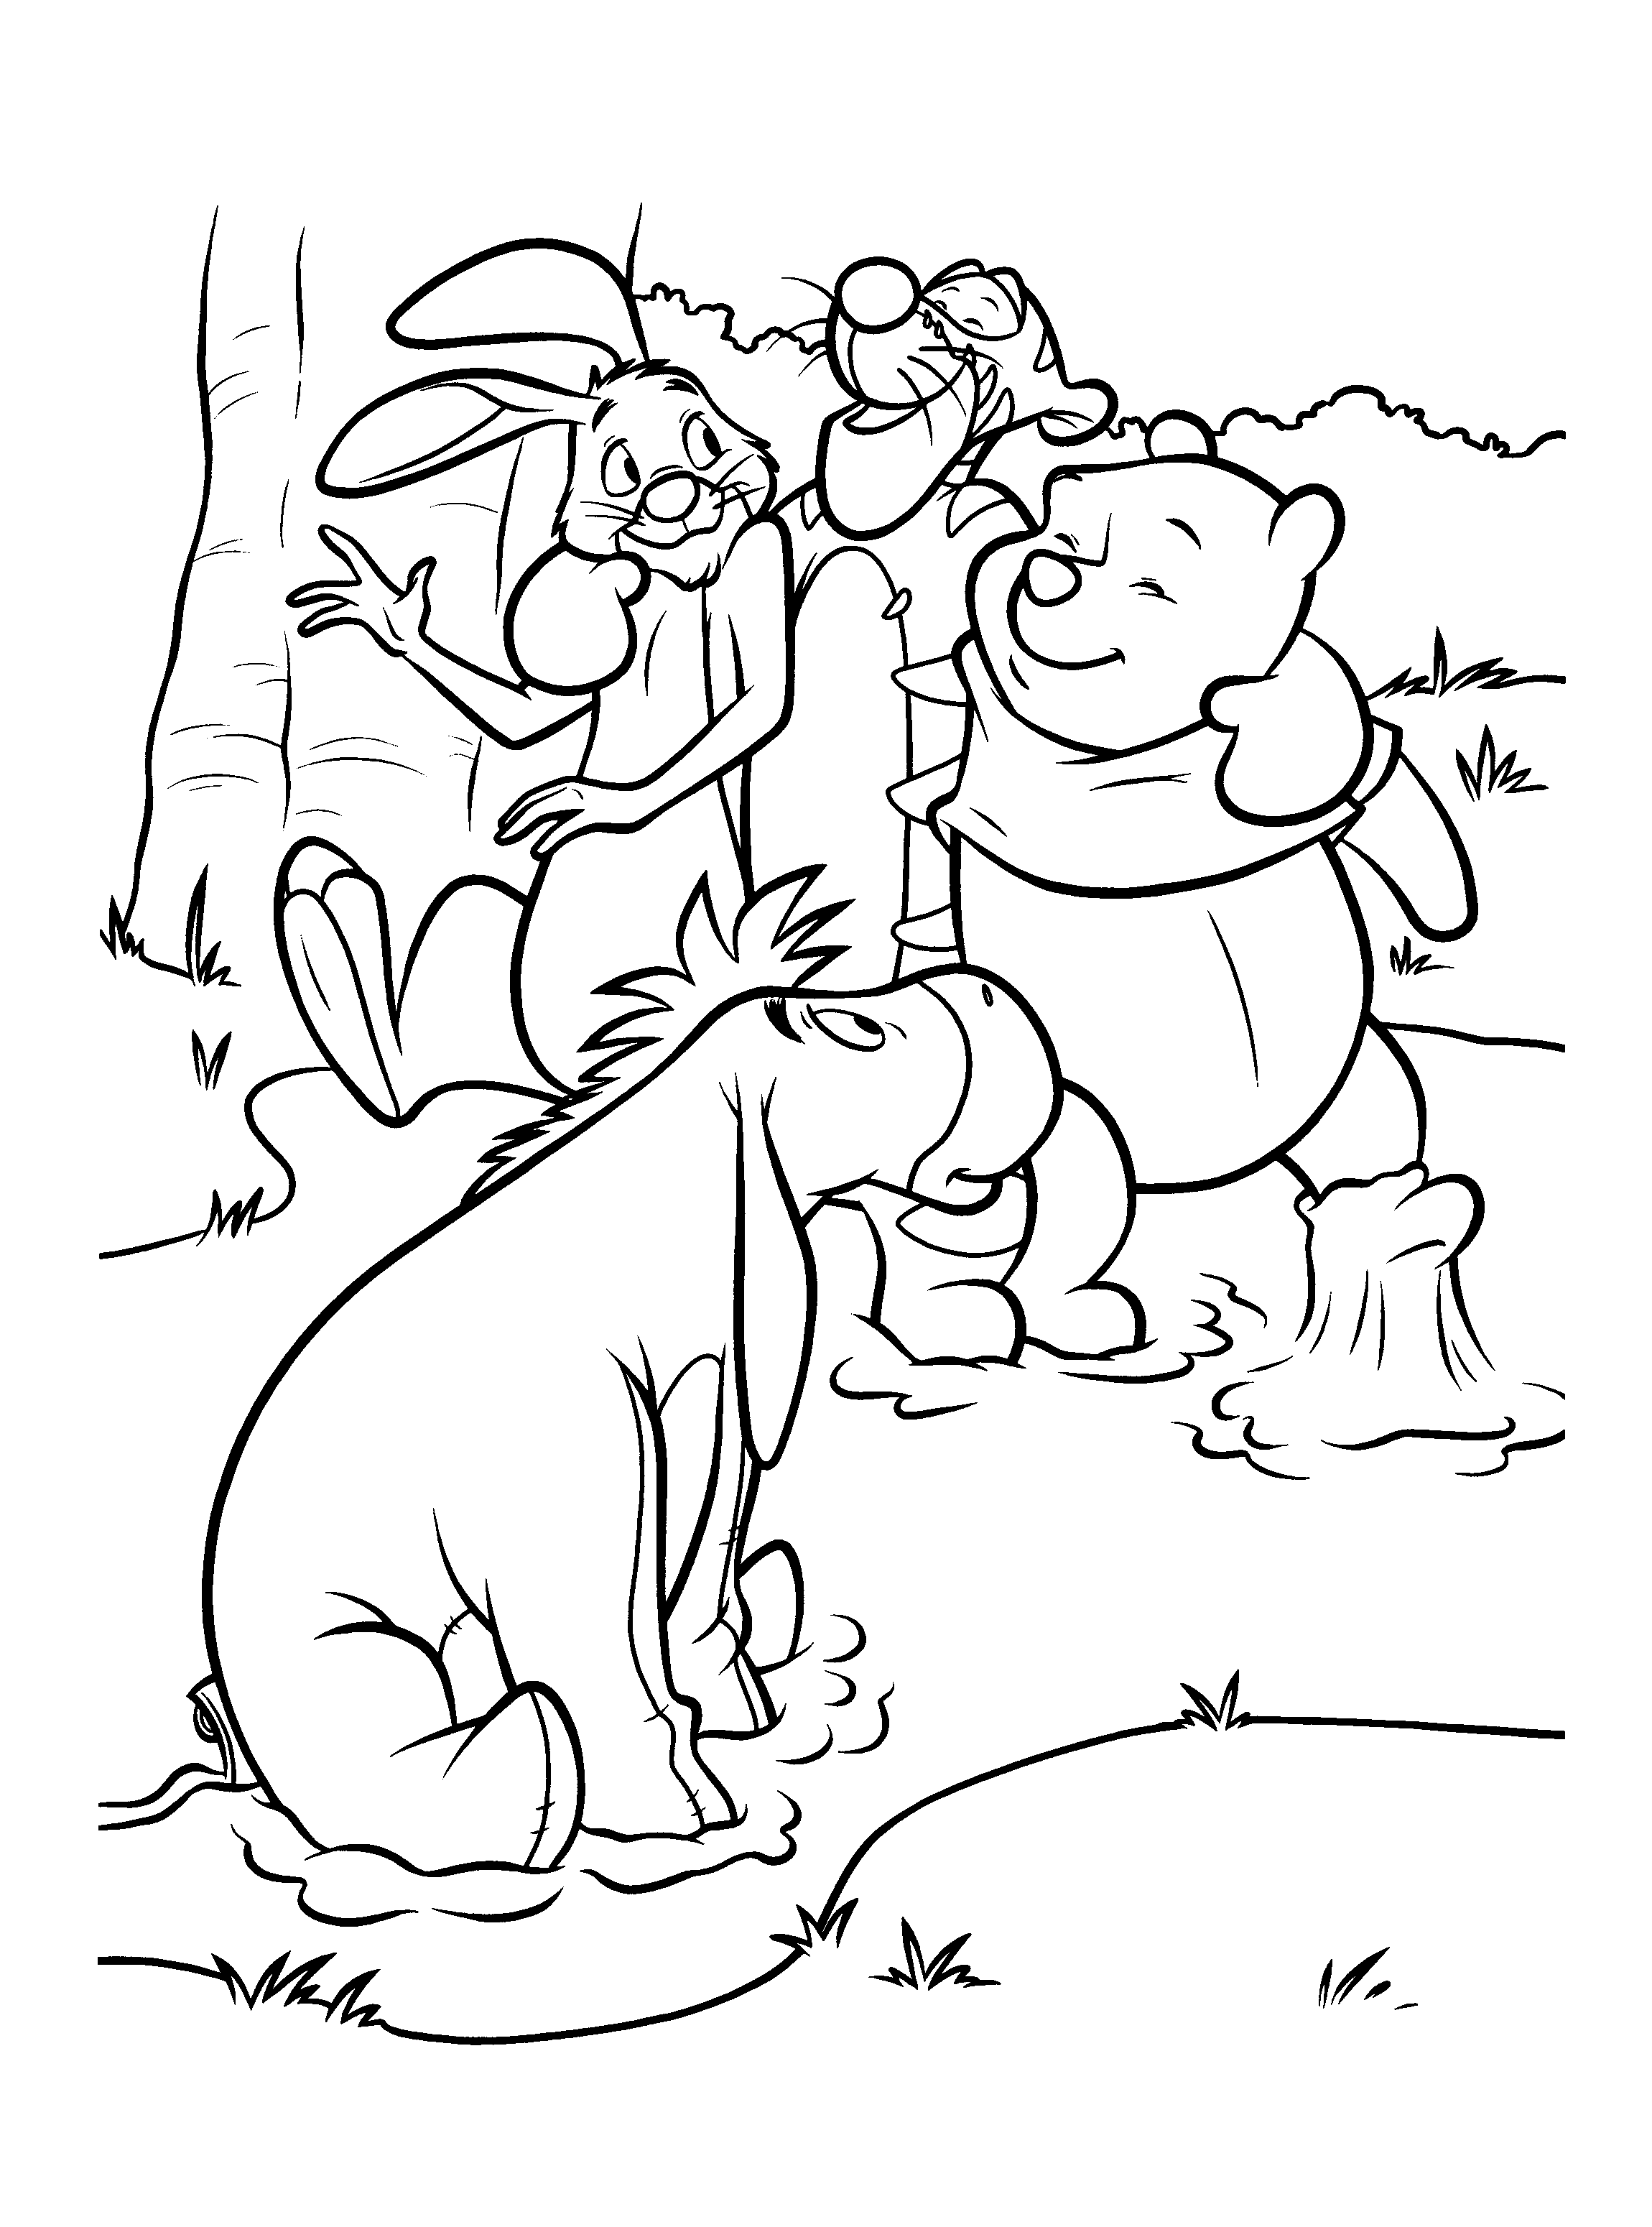 animated-coloring-pages-winnie-the-pooh-image-0079